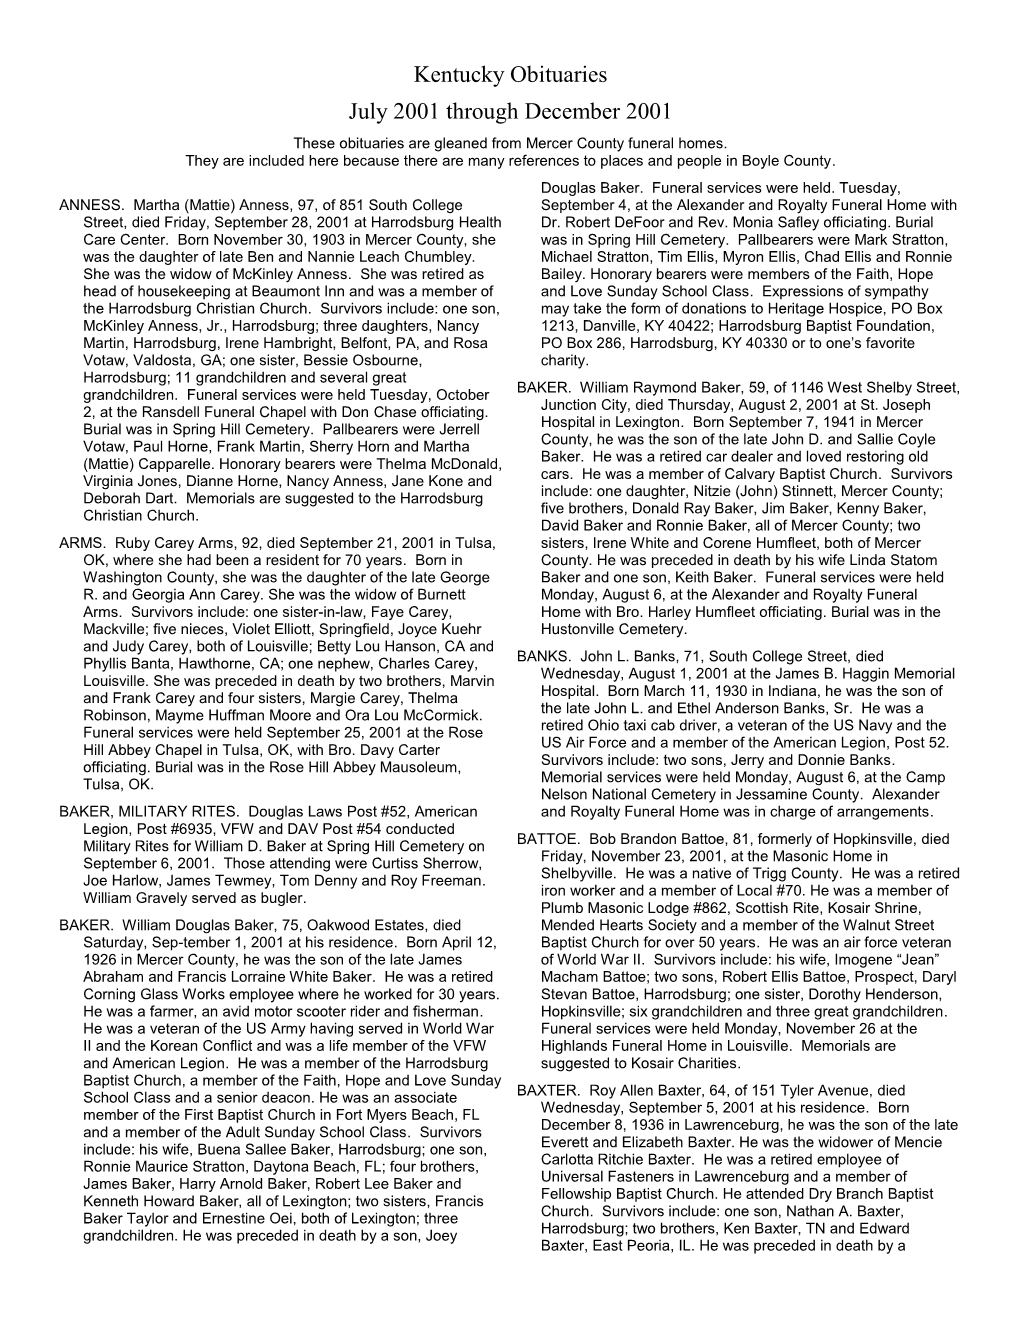 Kentucky Obituaries July 2001 Through December 2001 These Obituaries Are Gleaned from Mercer County Funeral Homes